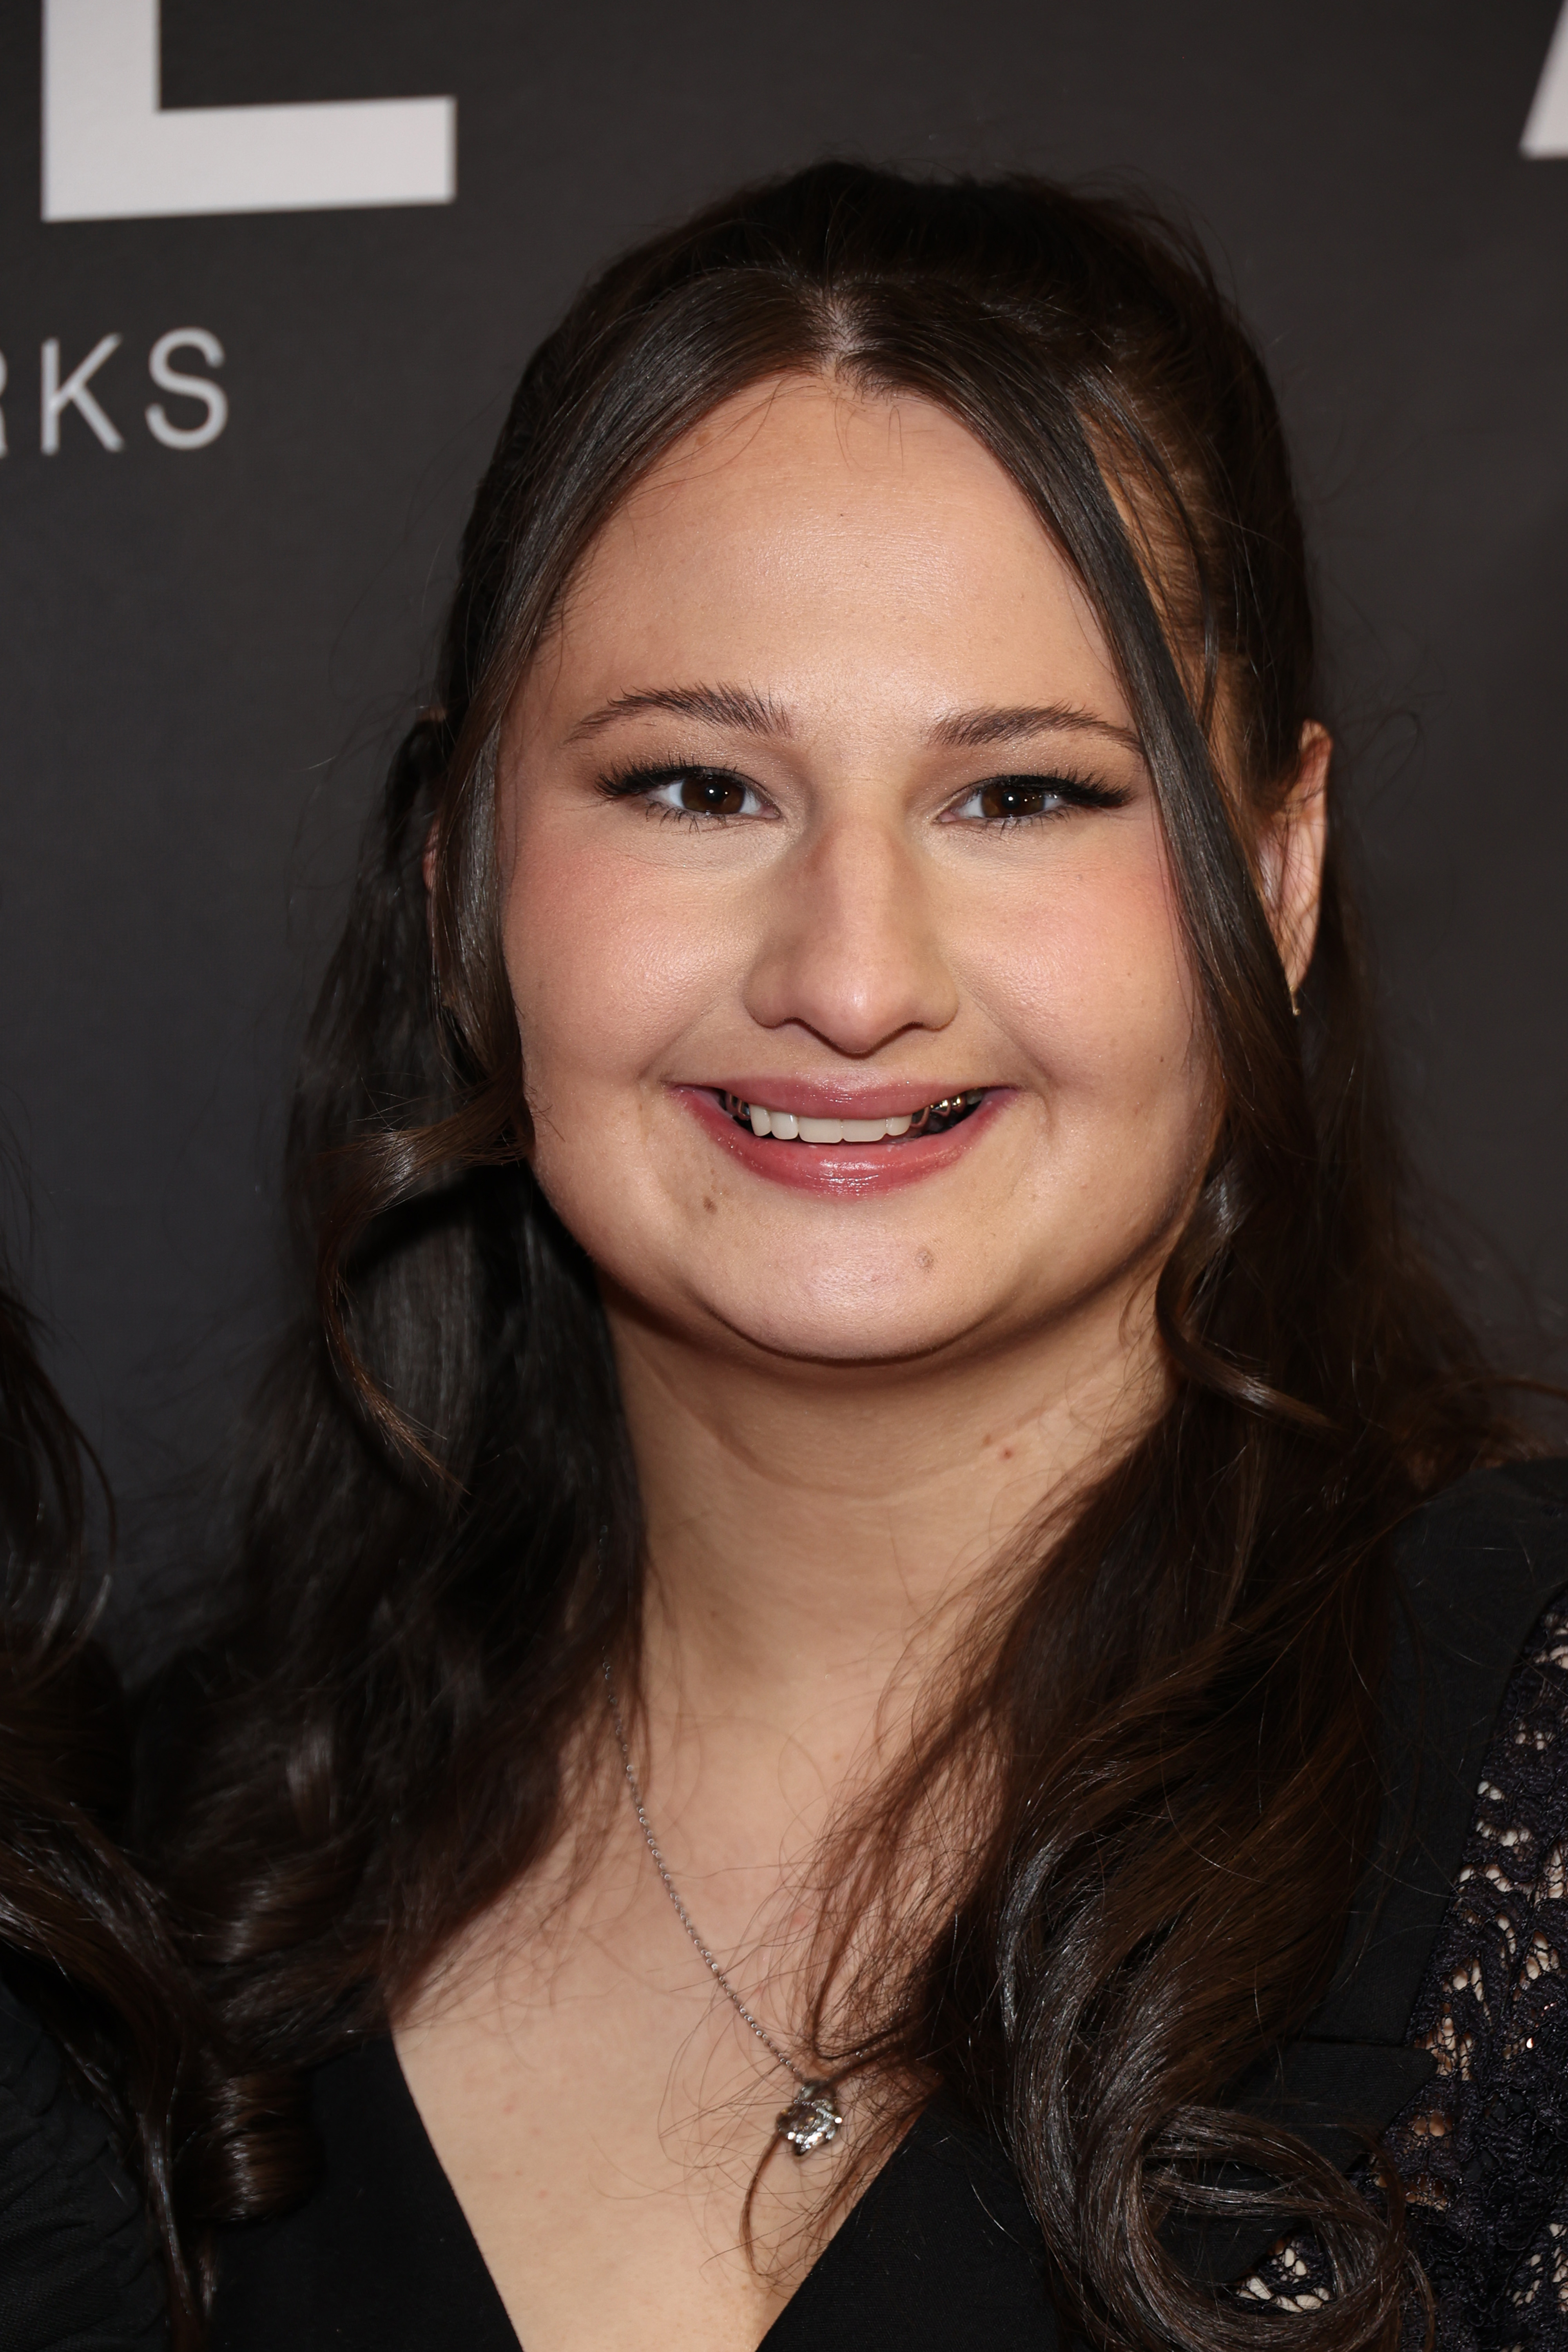 Gypsy Rose Blanchard during "The Prison Confessions of Gypsy Rose Blanchard" event on January 5, 2024, in New York City. | Source: Getty Images